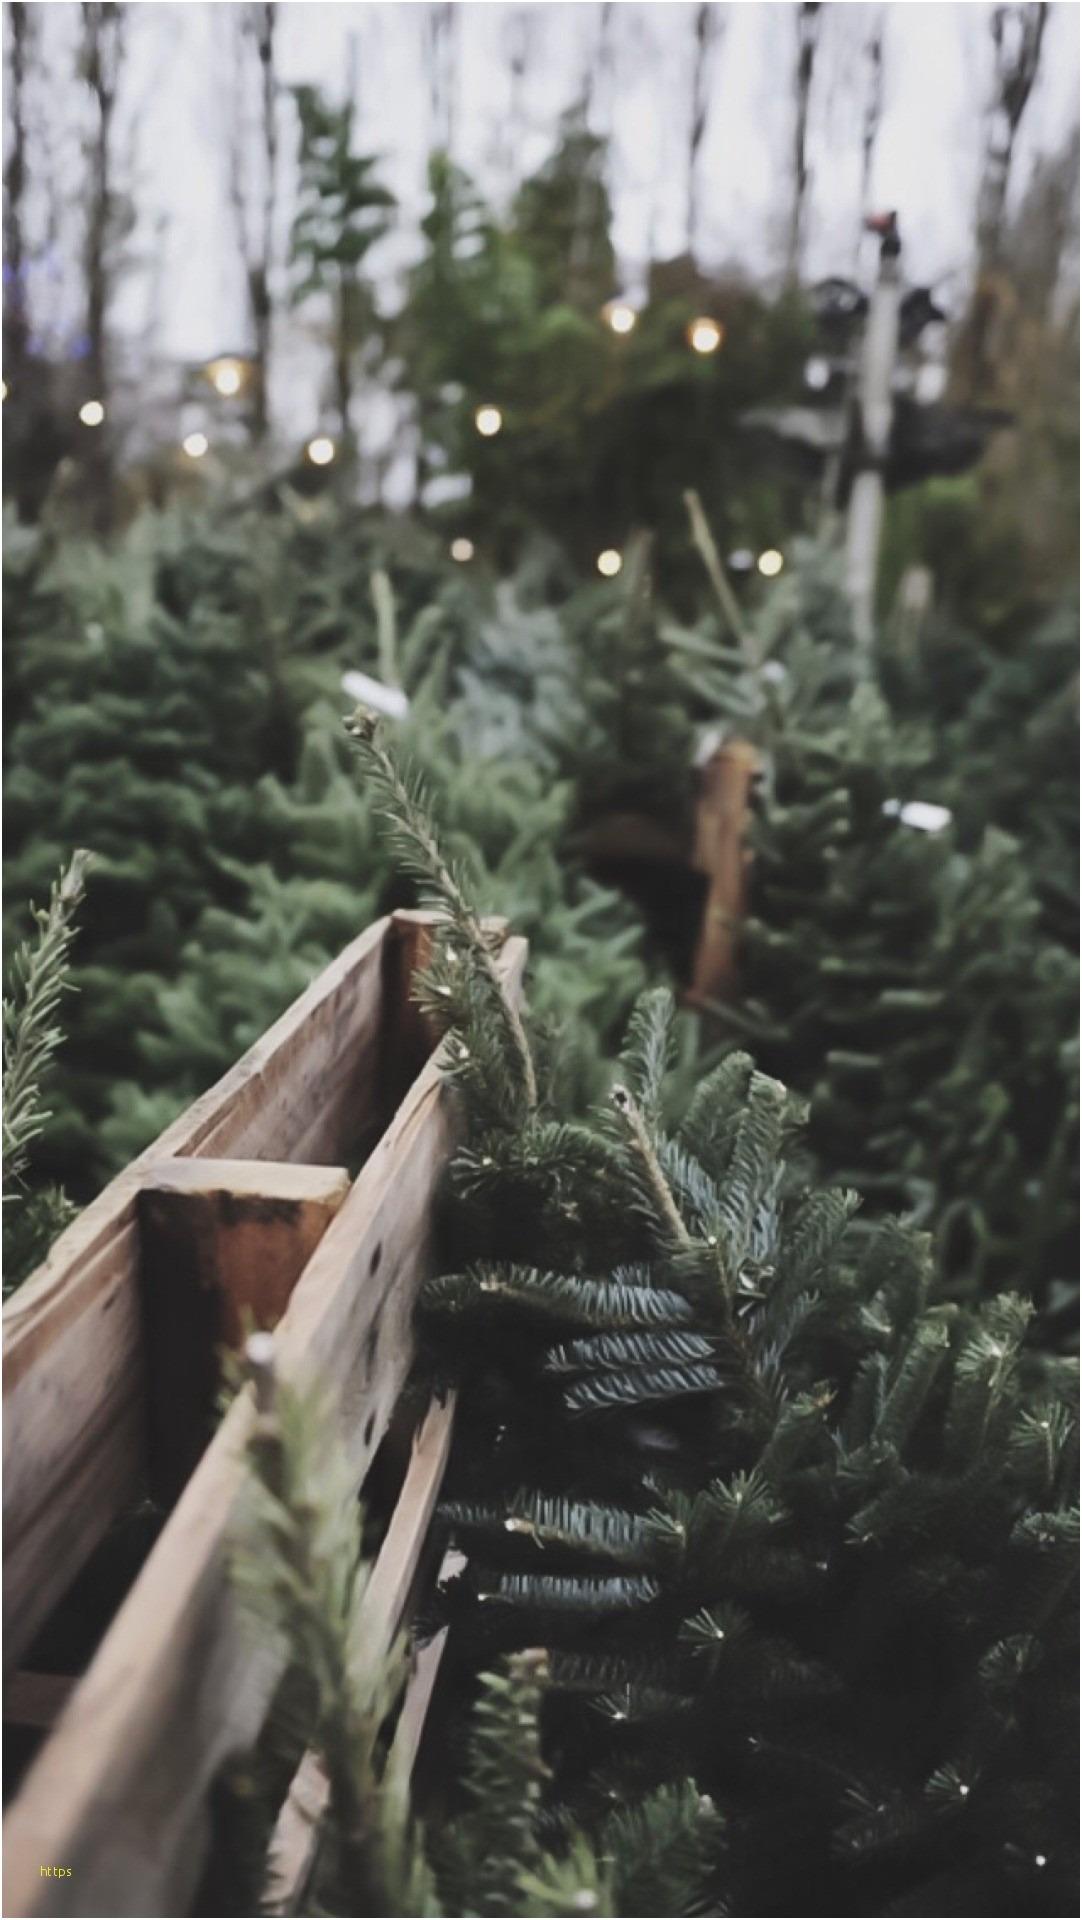 A wooden crate filled with christmas trees - Christmas